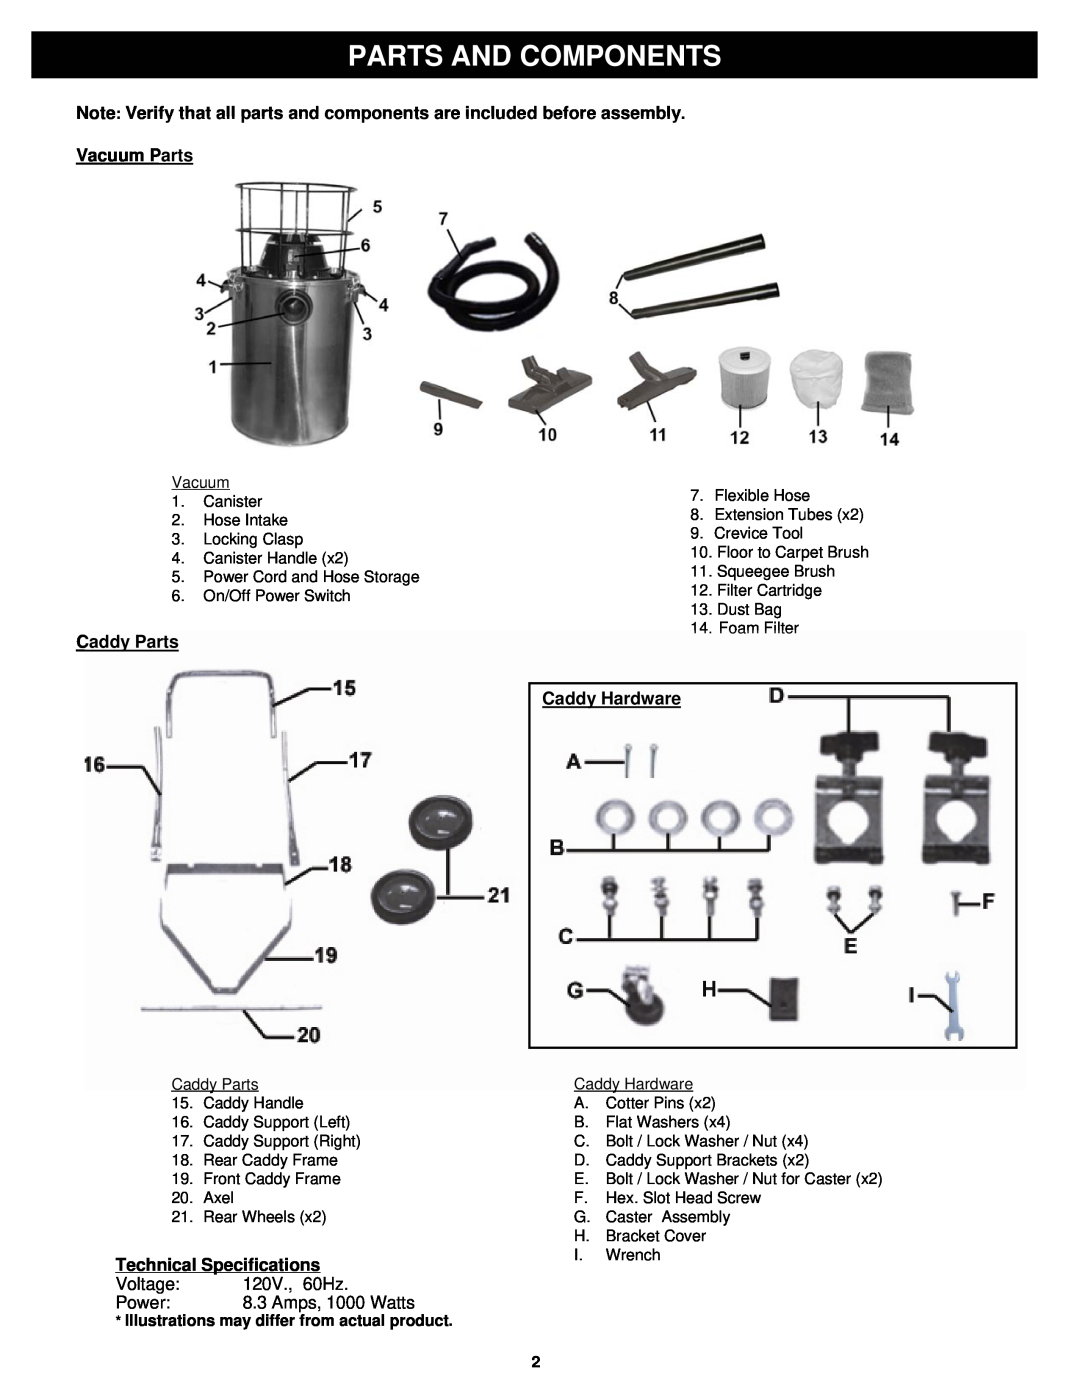 Fantom Vacuum CW233H owner manual Parts And Components, Caddy Parts, Technical Specifications, Caddy Hardware 